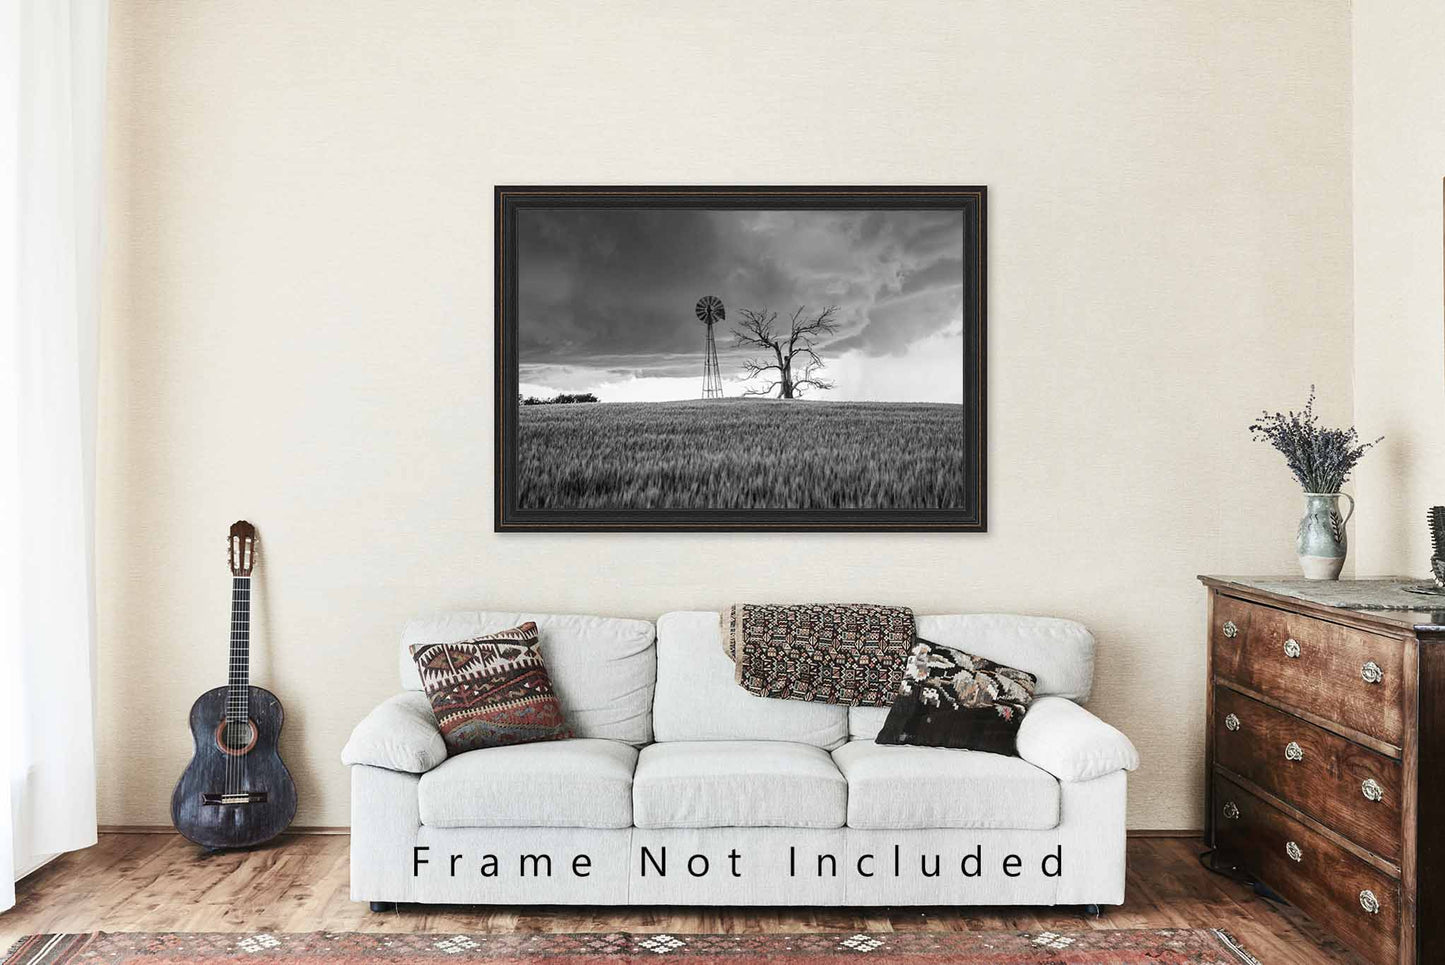 Country Photography Print | Windmill and Tree Picture | Oklahoma Wall Art | Black and White Photo | Farmhouse Decor | Not Framed